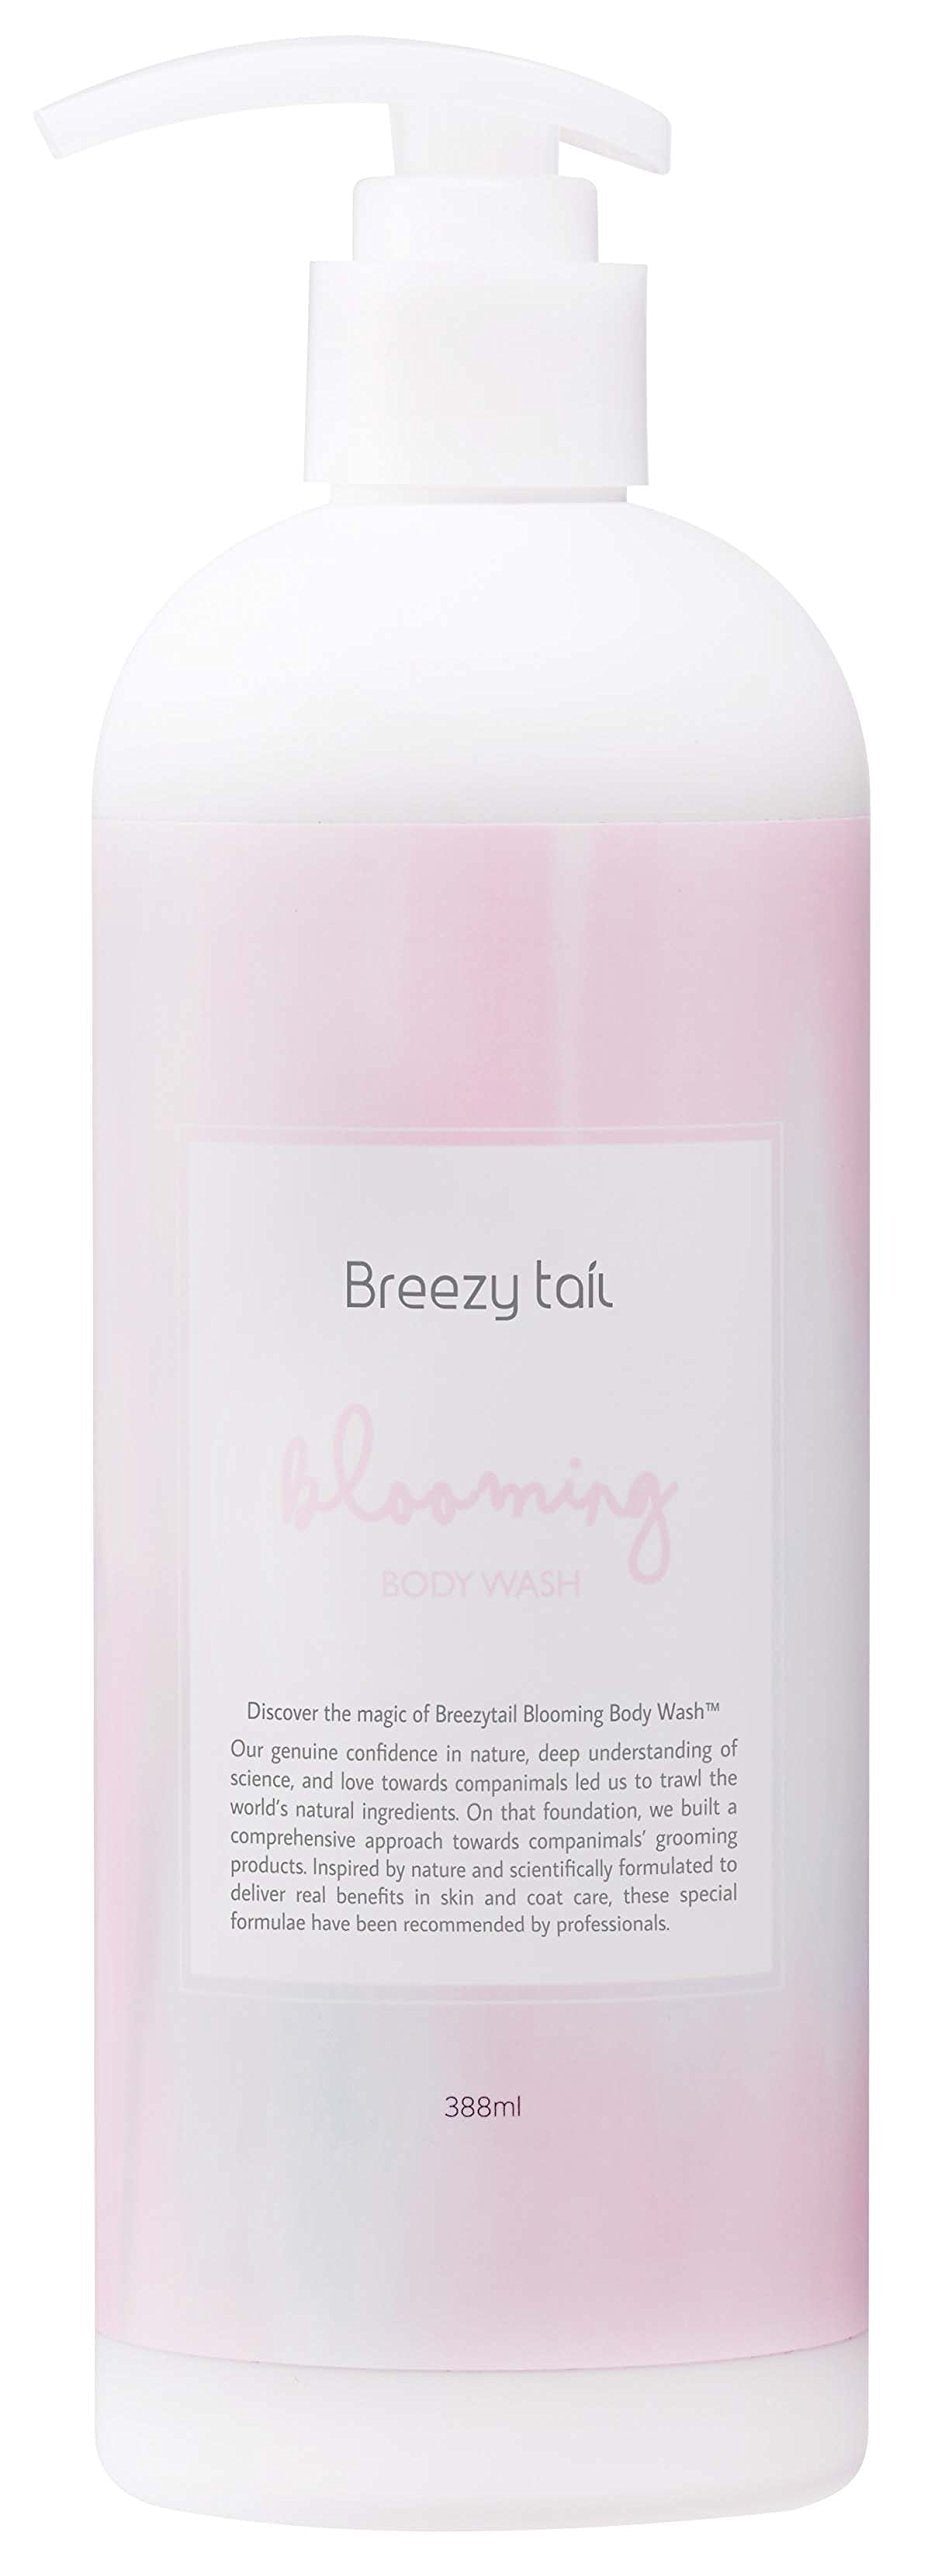 [Australia] - Breezytail Blooming Body Wash – Hypoallergenic Premium Natural Dog Shampoo | Skin & Coat Care for Dogs, Puppies, Pets | Canine Derma Capsule Technology | Soothing for Dry, Sensitive or Itchy Skin 